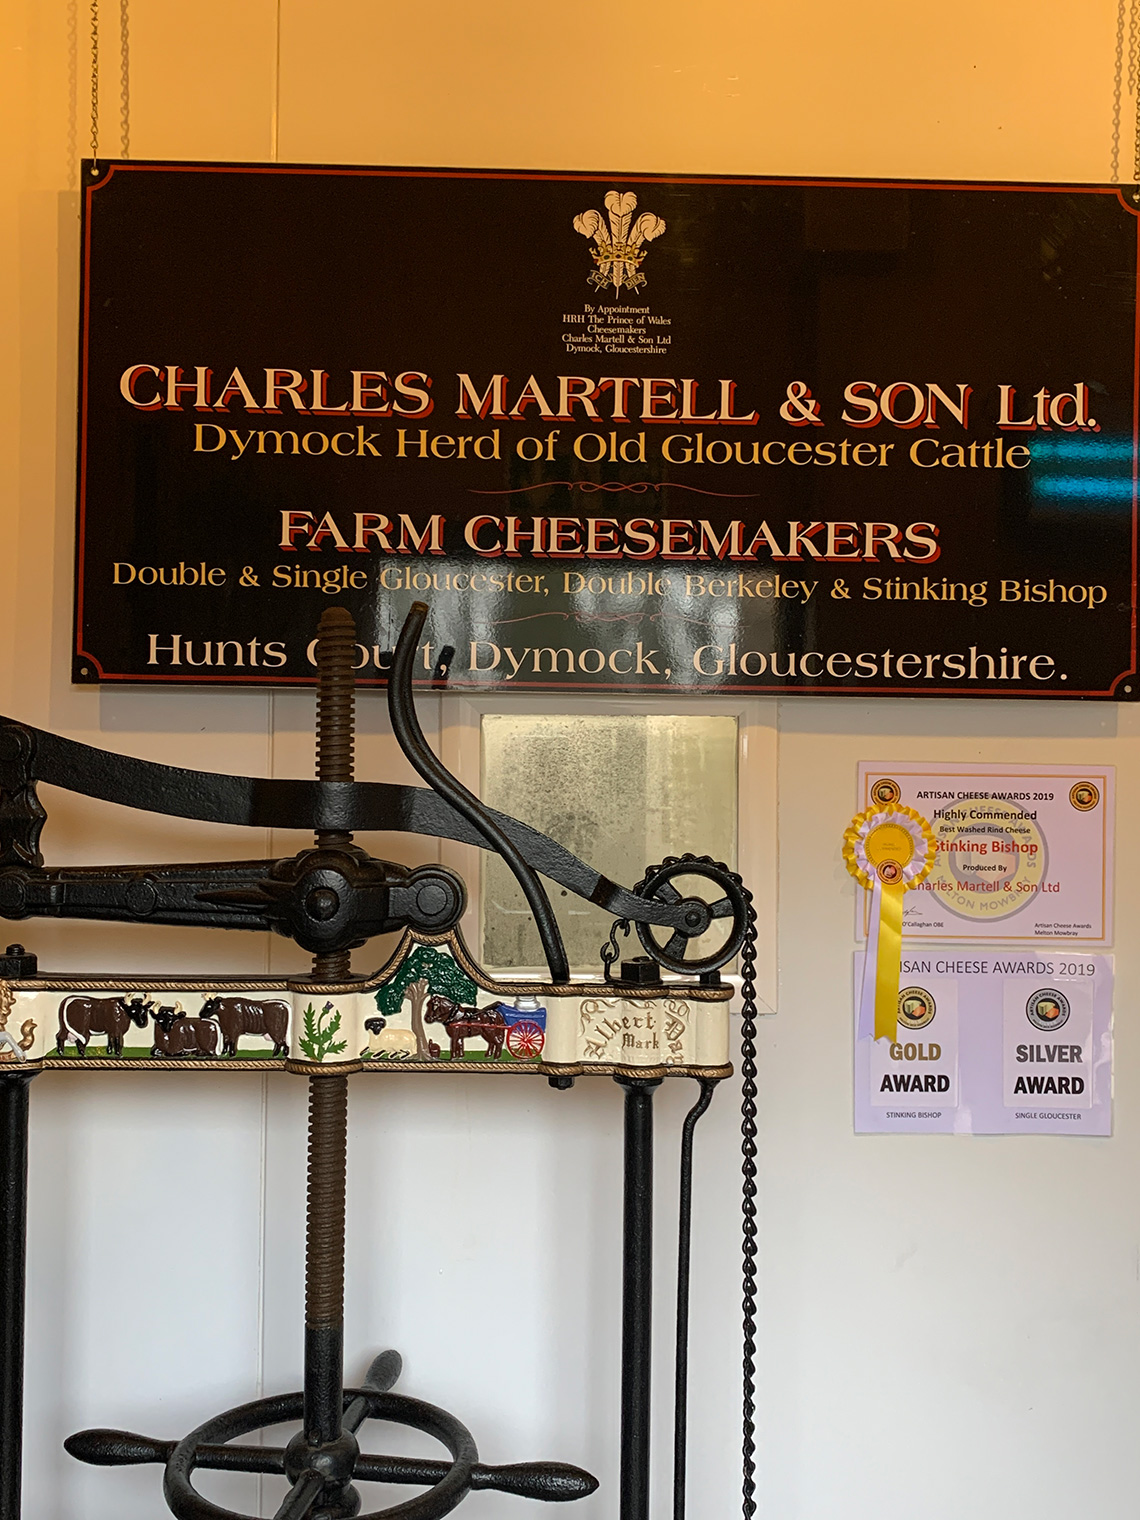 Great Britain's best cheesemakers Charles Martell & Son